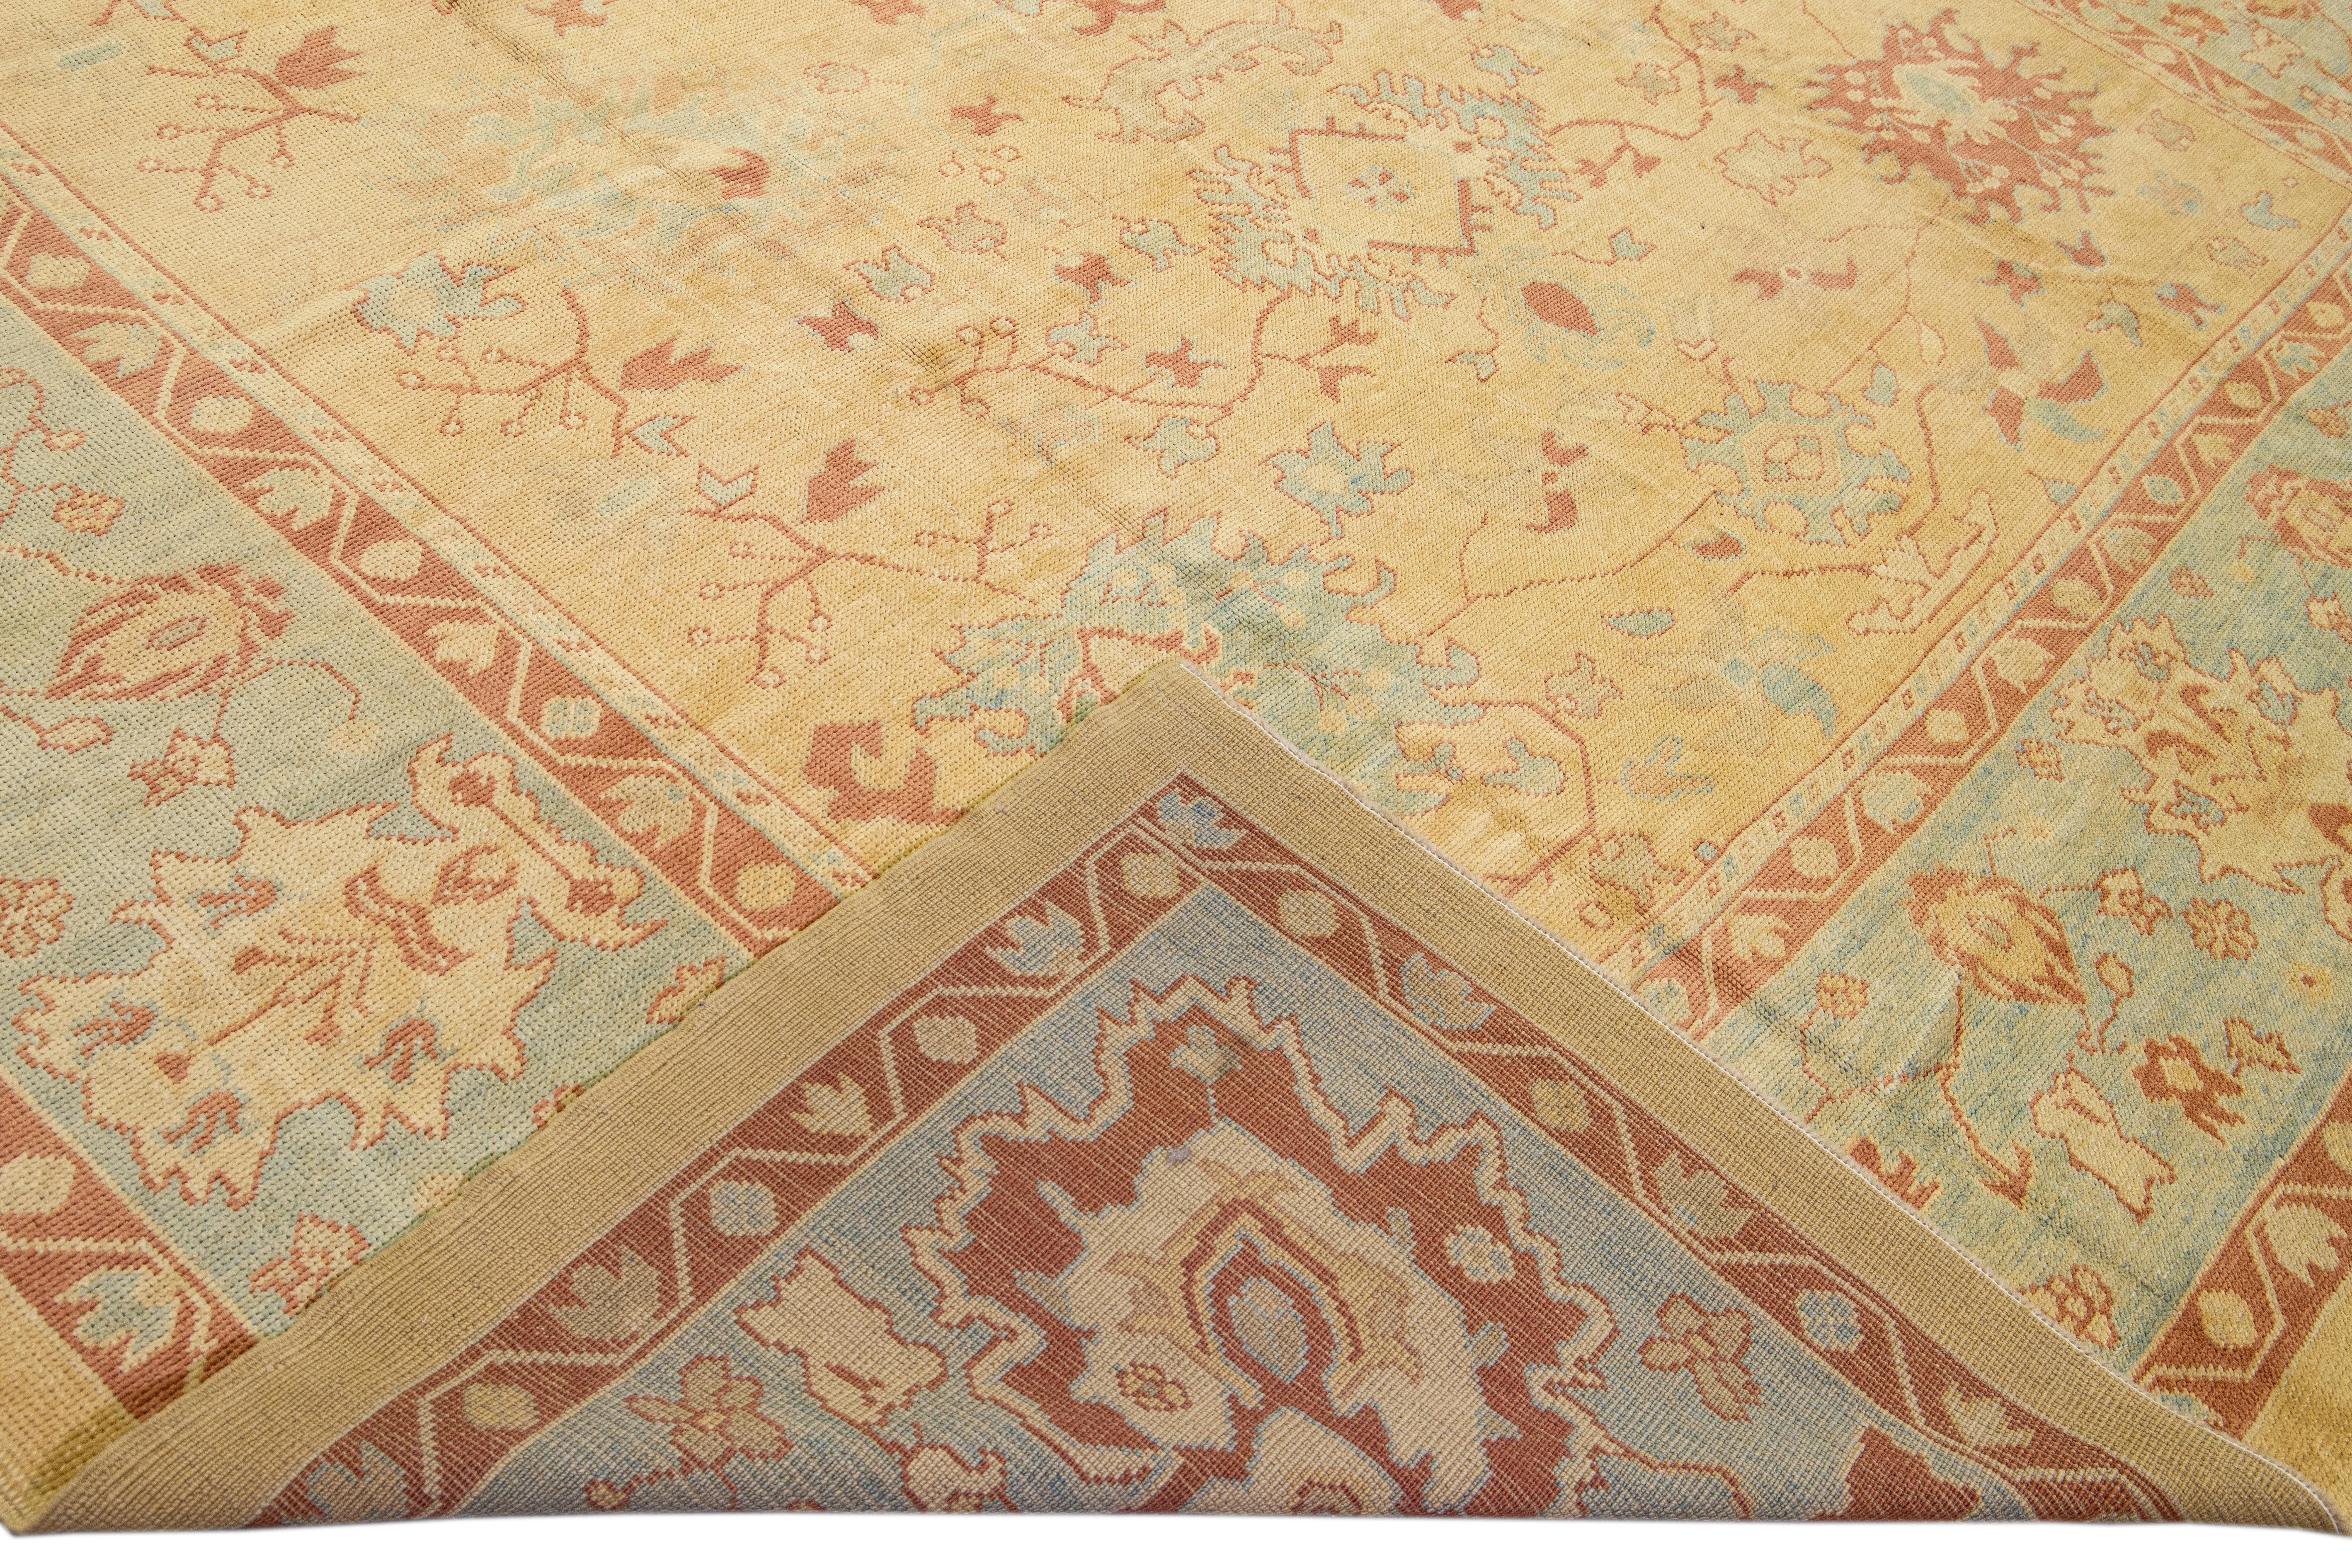 Beautiful modern Oushak hand-knotted wool rug with a goldenrod field. This Oushak rug has blue frame and terracotta accents that feature a gorgeous floral pattern design.

This rug measures: 11'9